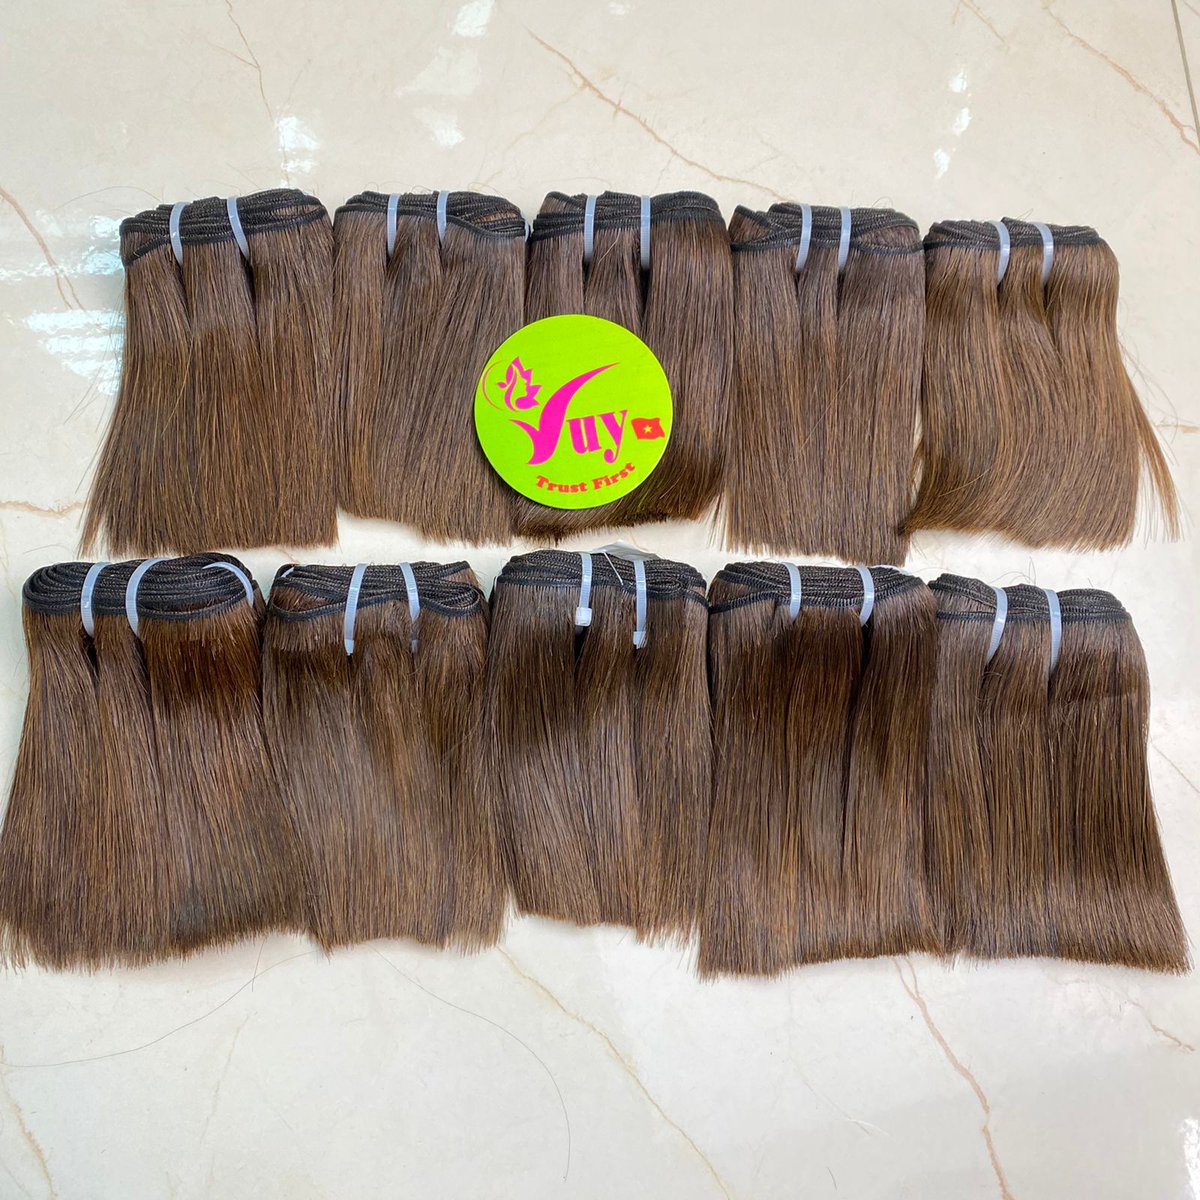 4” Brown Color Bone Straight From VUY VietNam
Contact with me on Whatsapp
😍+84 396092128.
#minktresses #rawhairbundles #rawhair #hairboutique #dmvhair #bmorehair #indriahair #rawhairextensions #bundles #rawhairvendor #rawhairs #protectivestyles #rawhairwholesale #lacefront